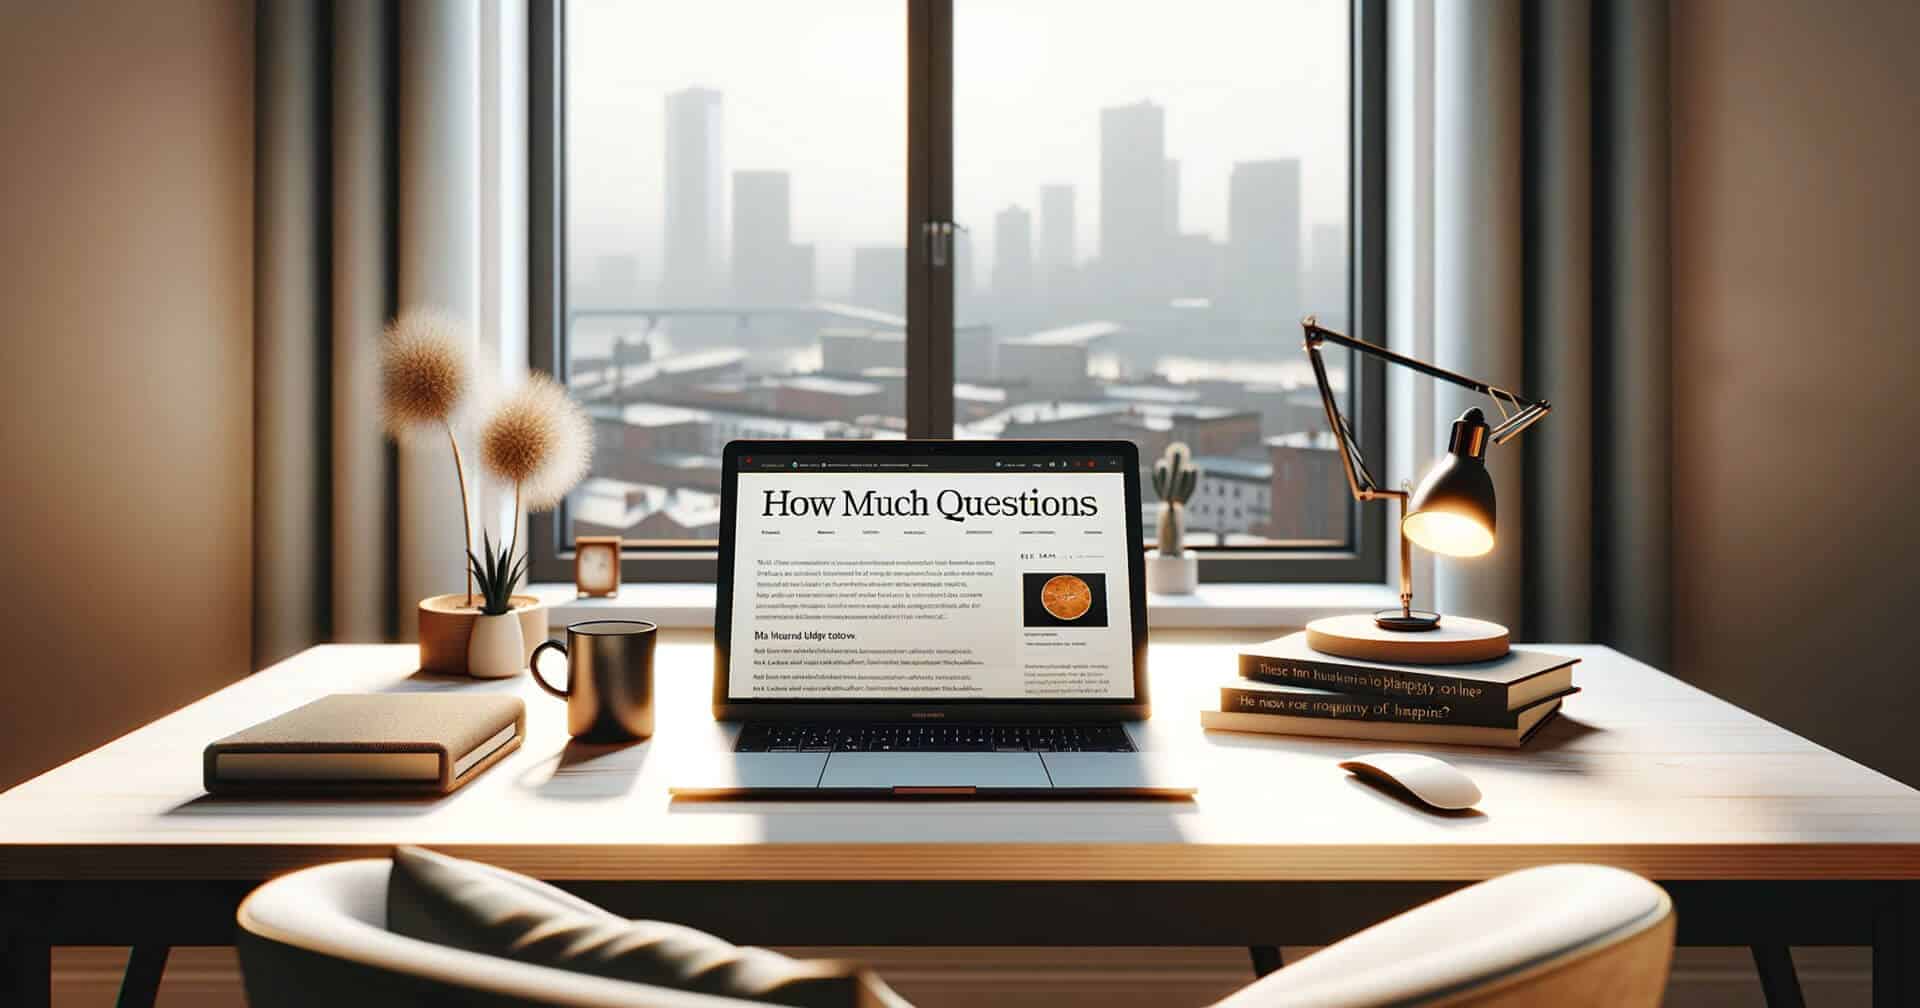 A laptop on a desk with a newspaper on it, showing how much news answers could be revealed.